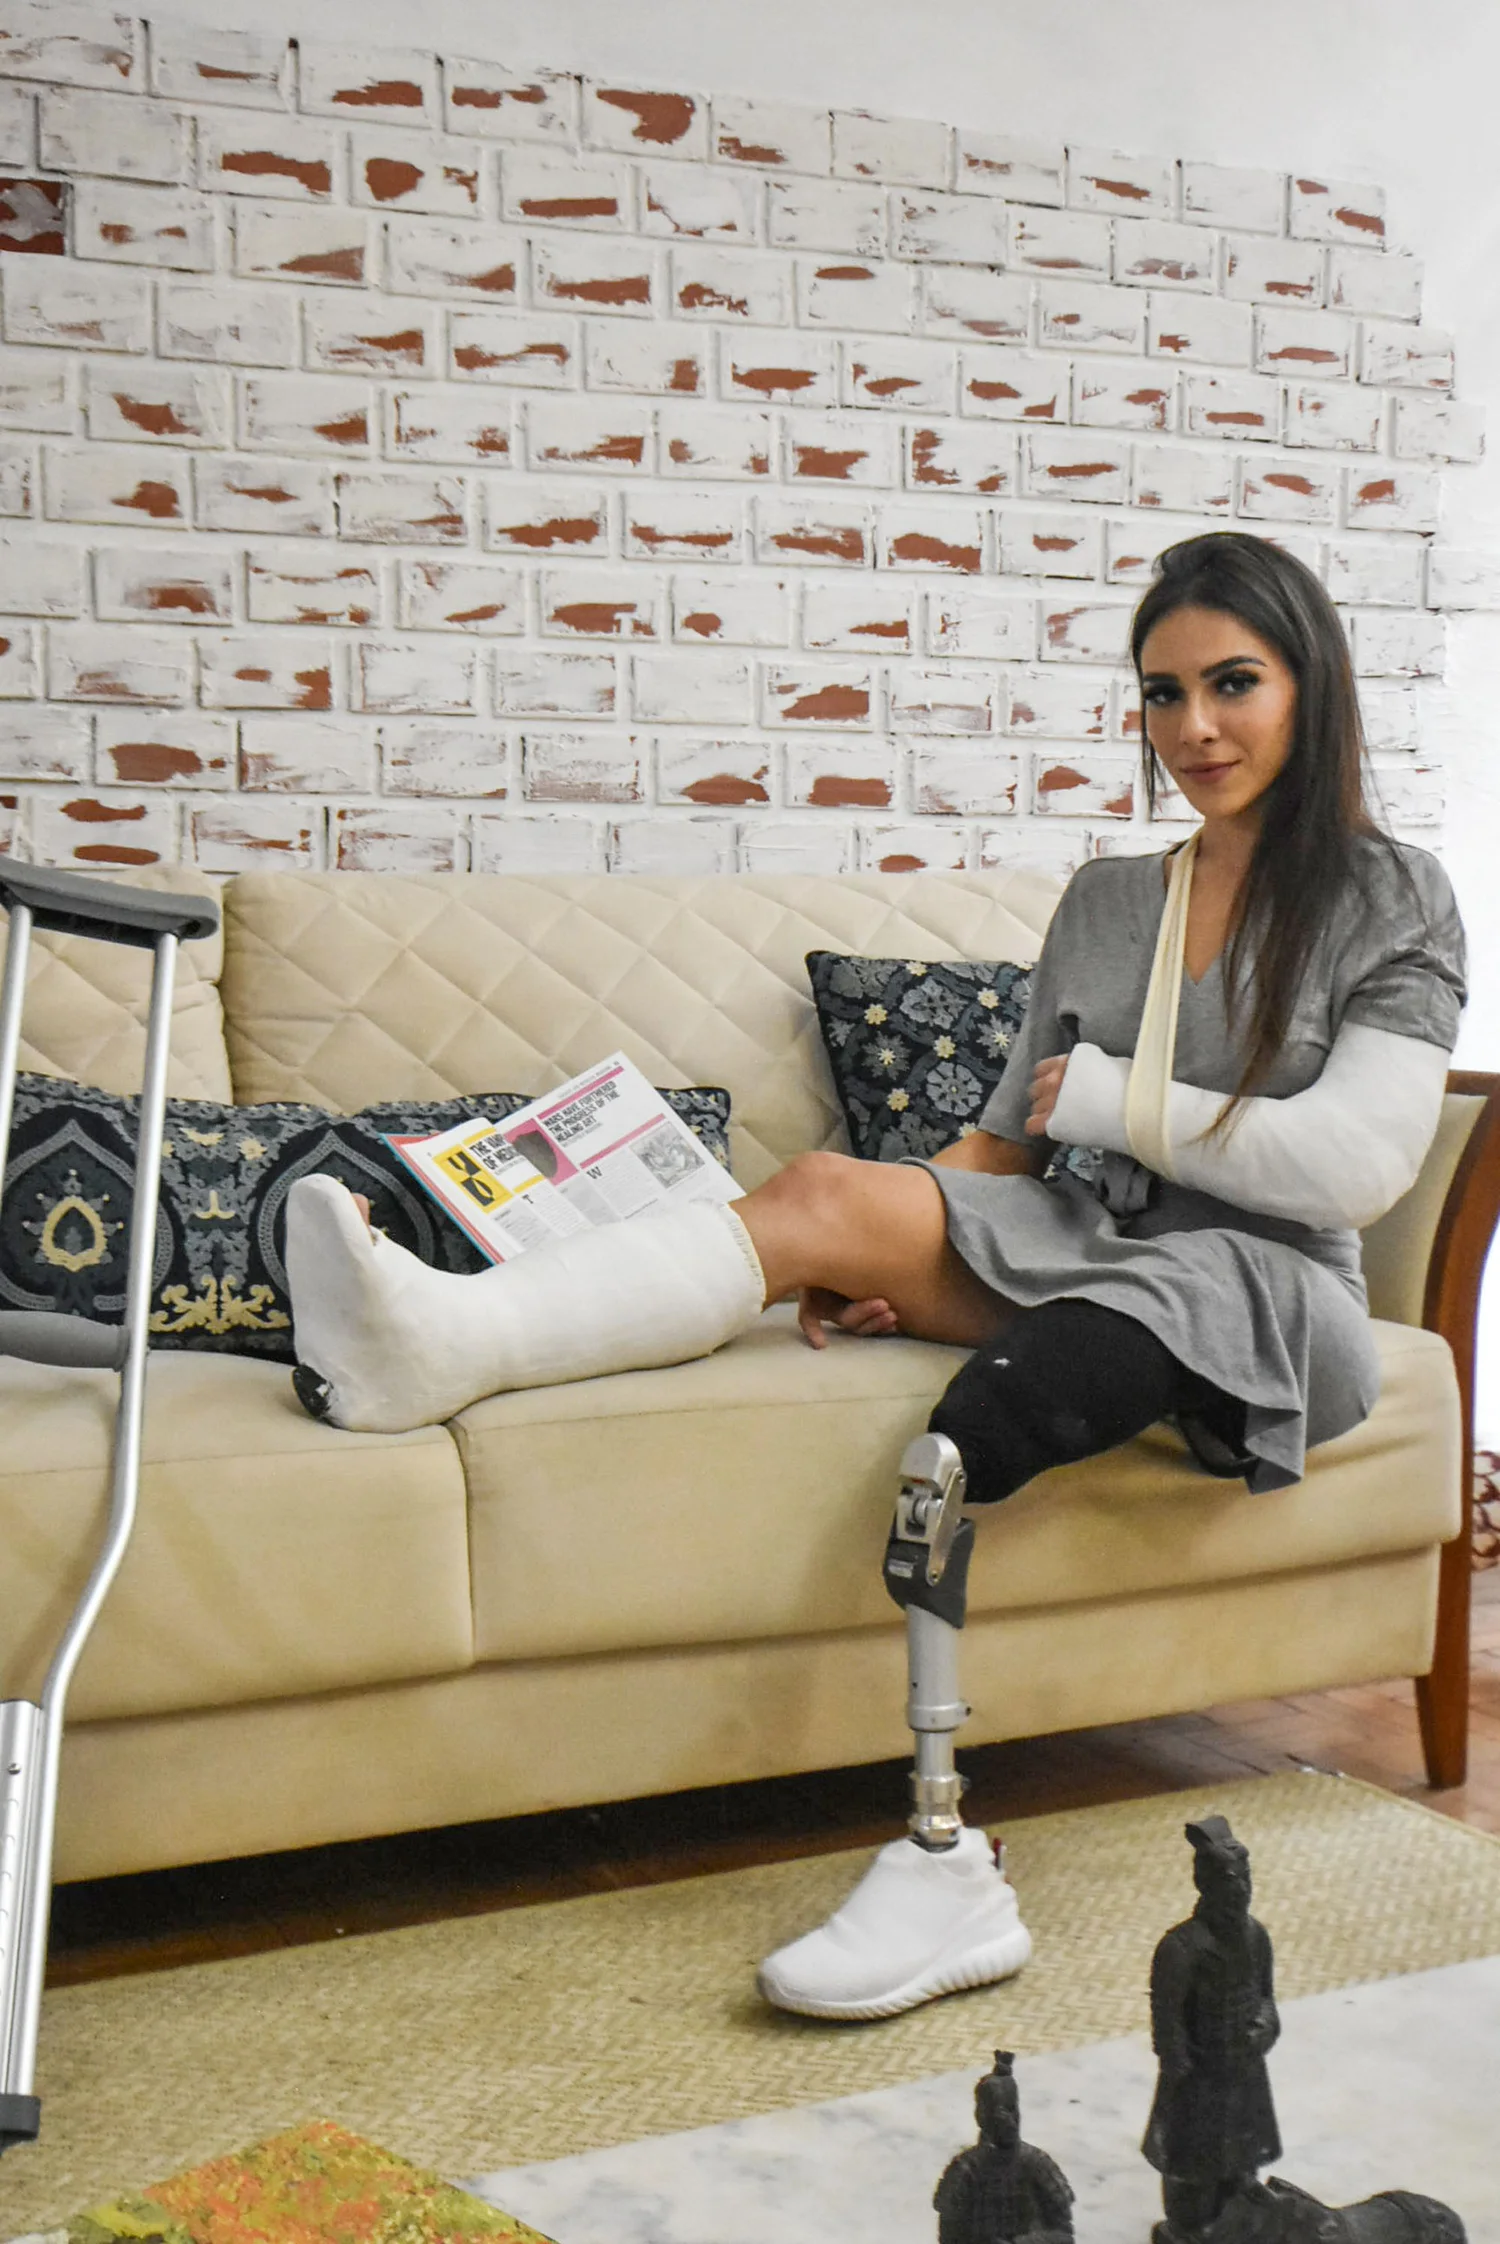 Giovanna SAK + SLWC + LAC - Chapter 01 - A amputee suffers a terrible run over and suffers multiple fractures + Accident the hit-and-run + Plastering Leg + Fresh Plaster Casts